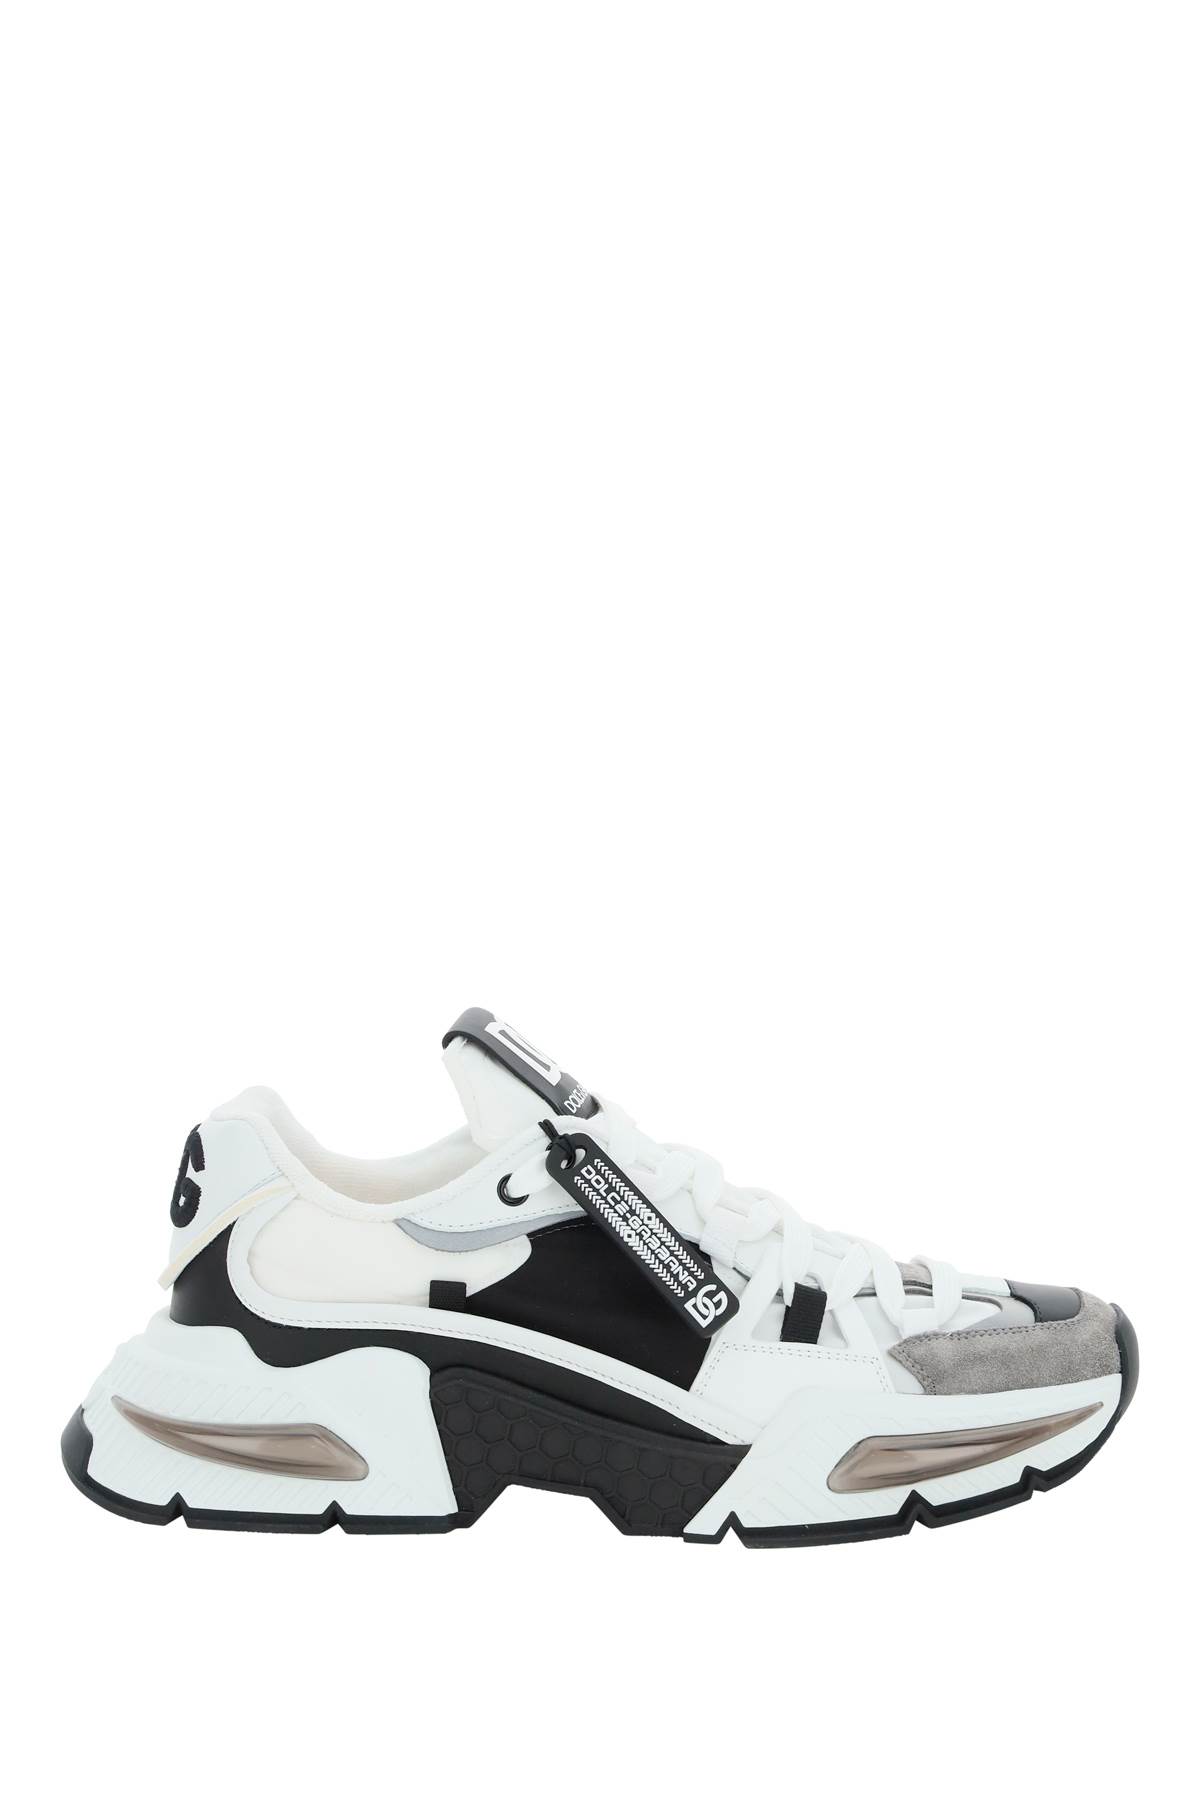 Dolce & Gabbana Air Master Trainers In White